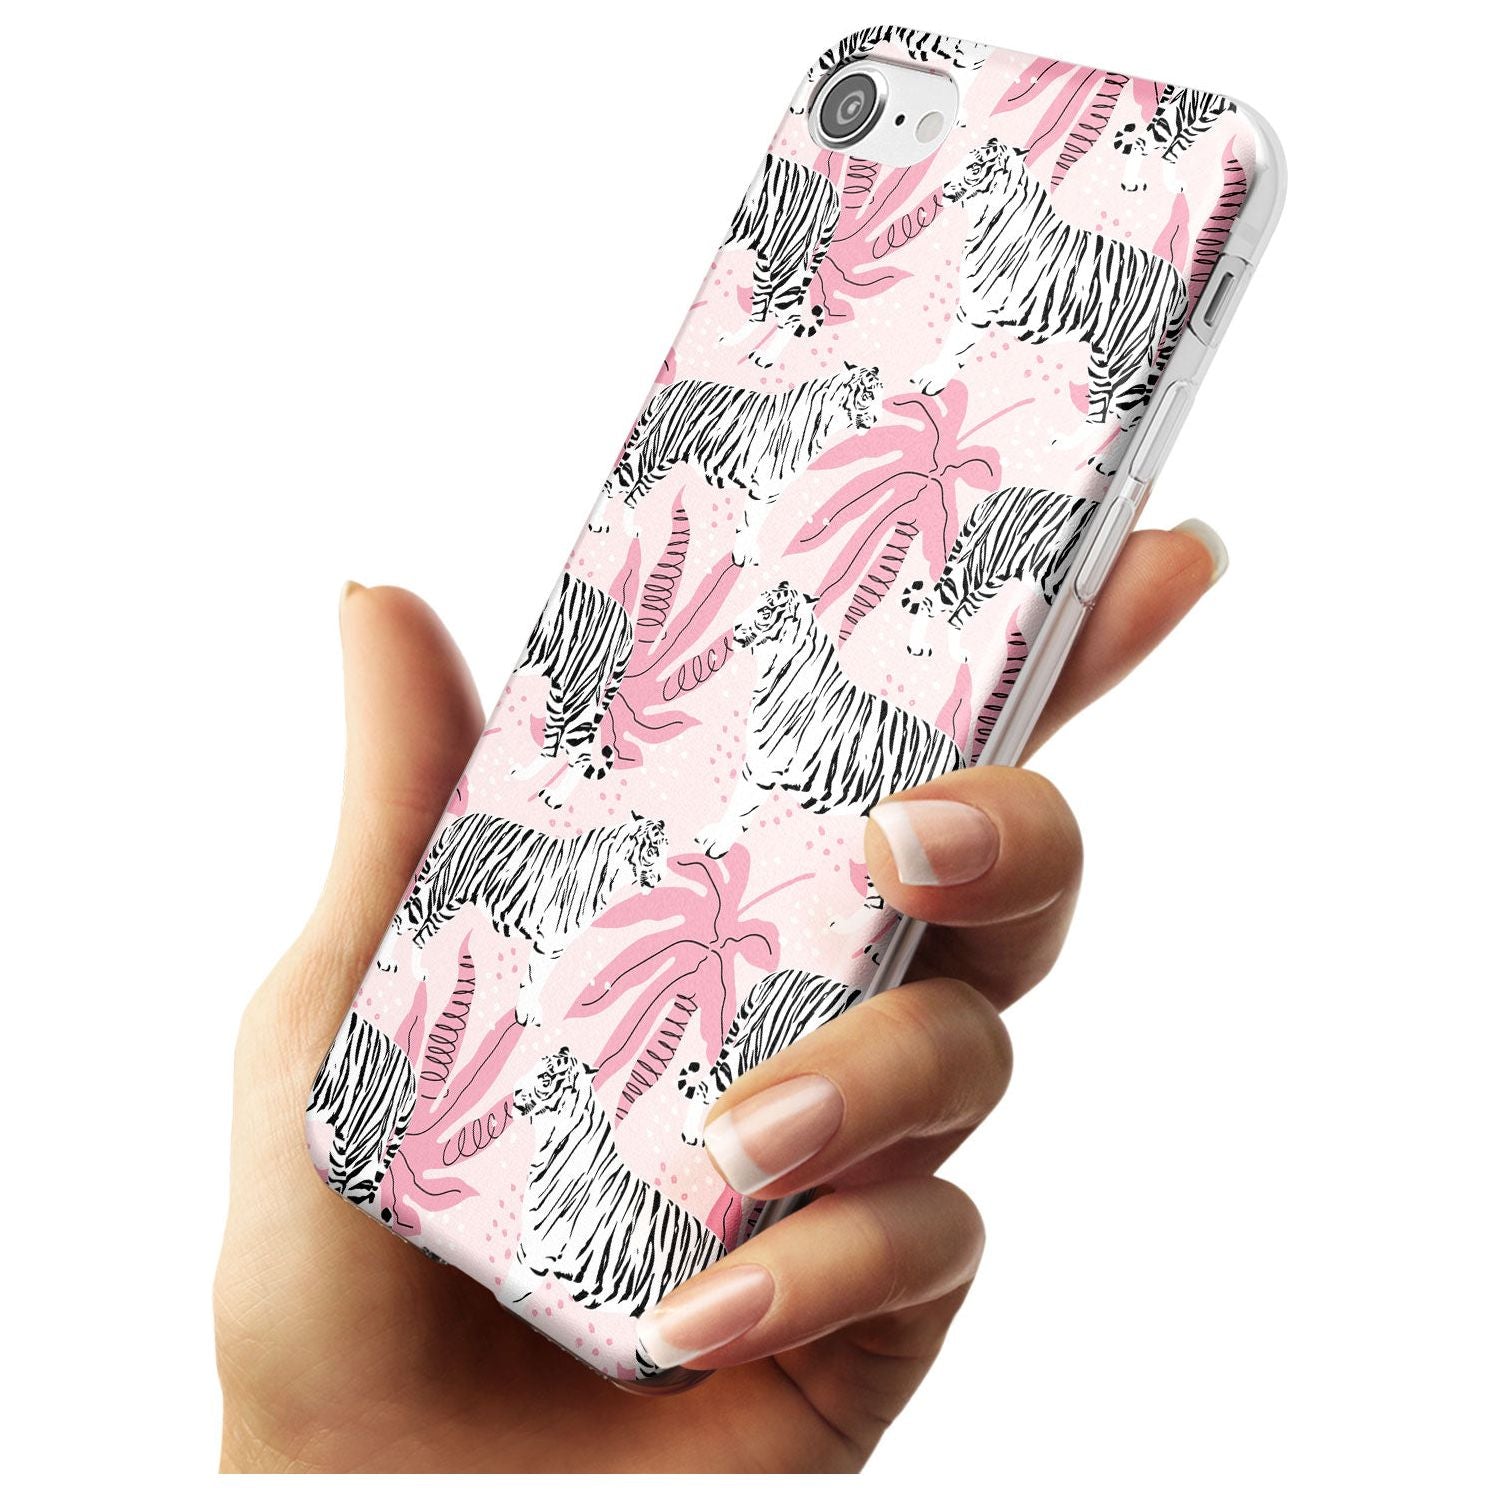 White Tigers on Pink Pattern Slim TPU Phone Case for iPhone SE 8 7 Plus